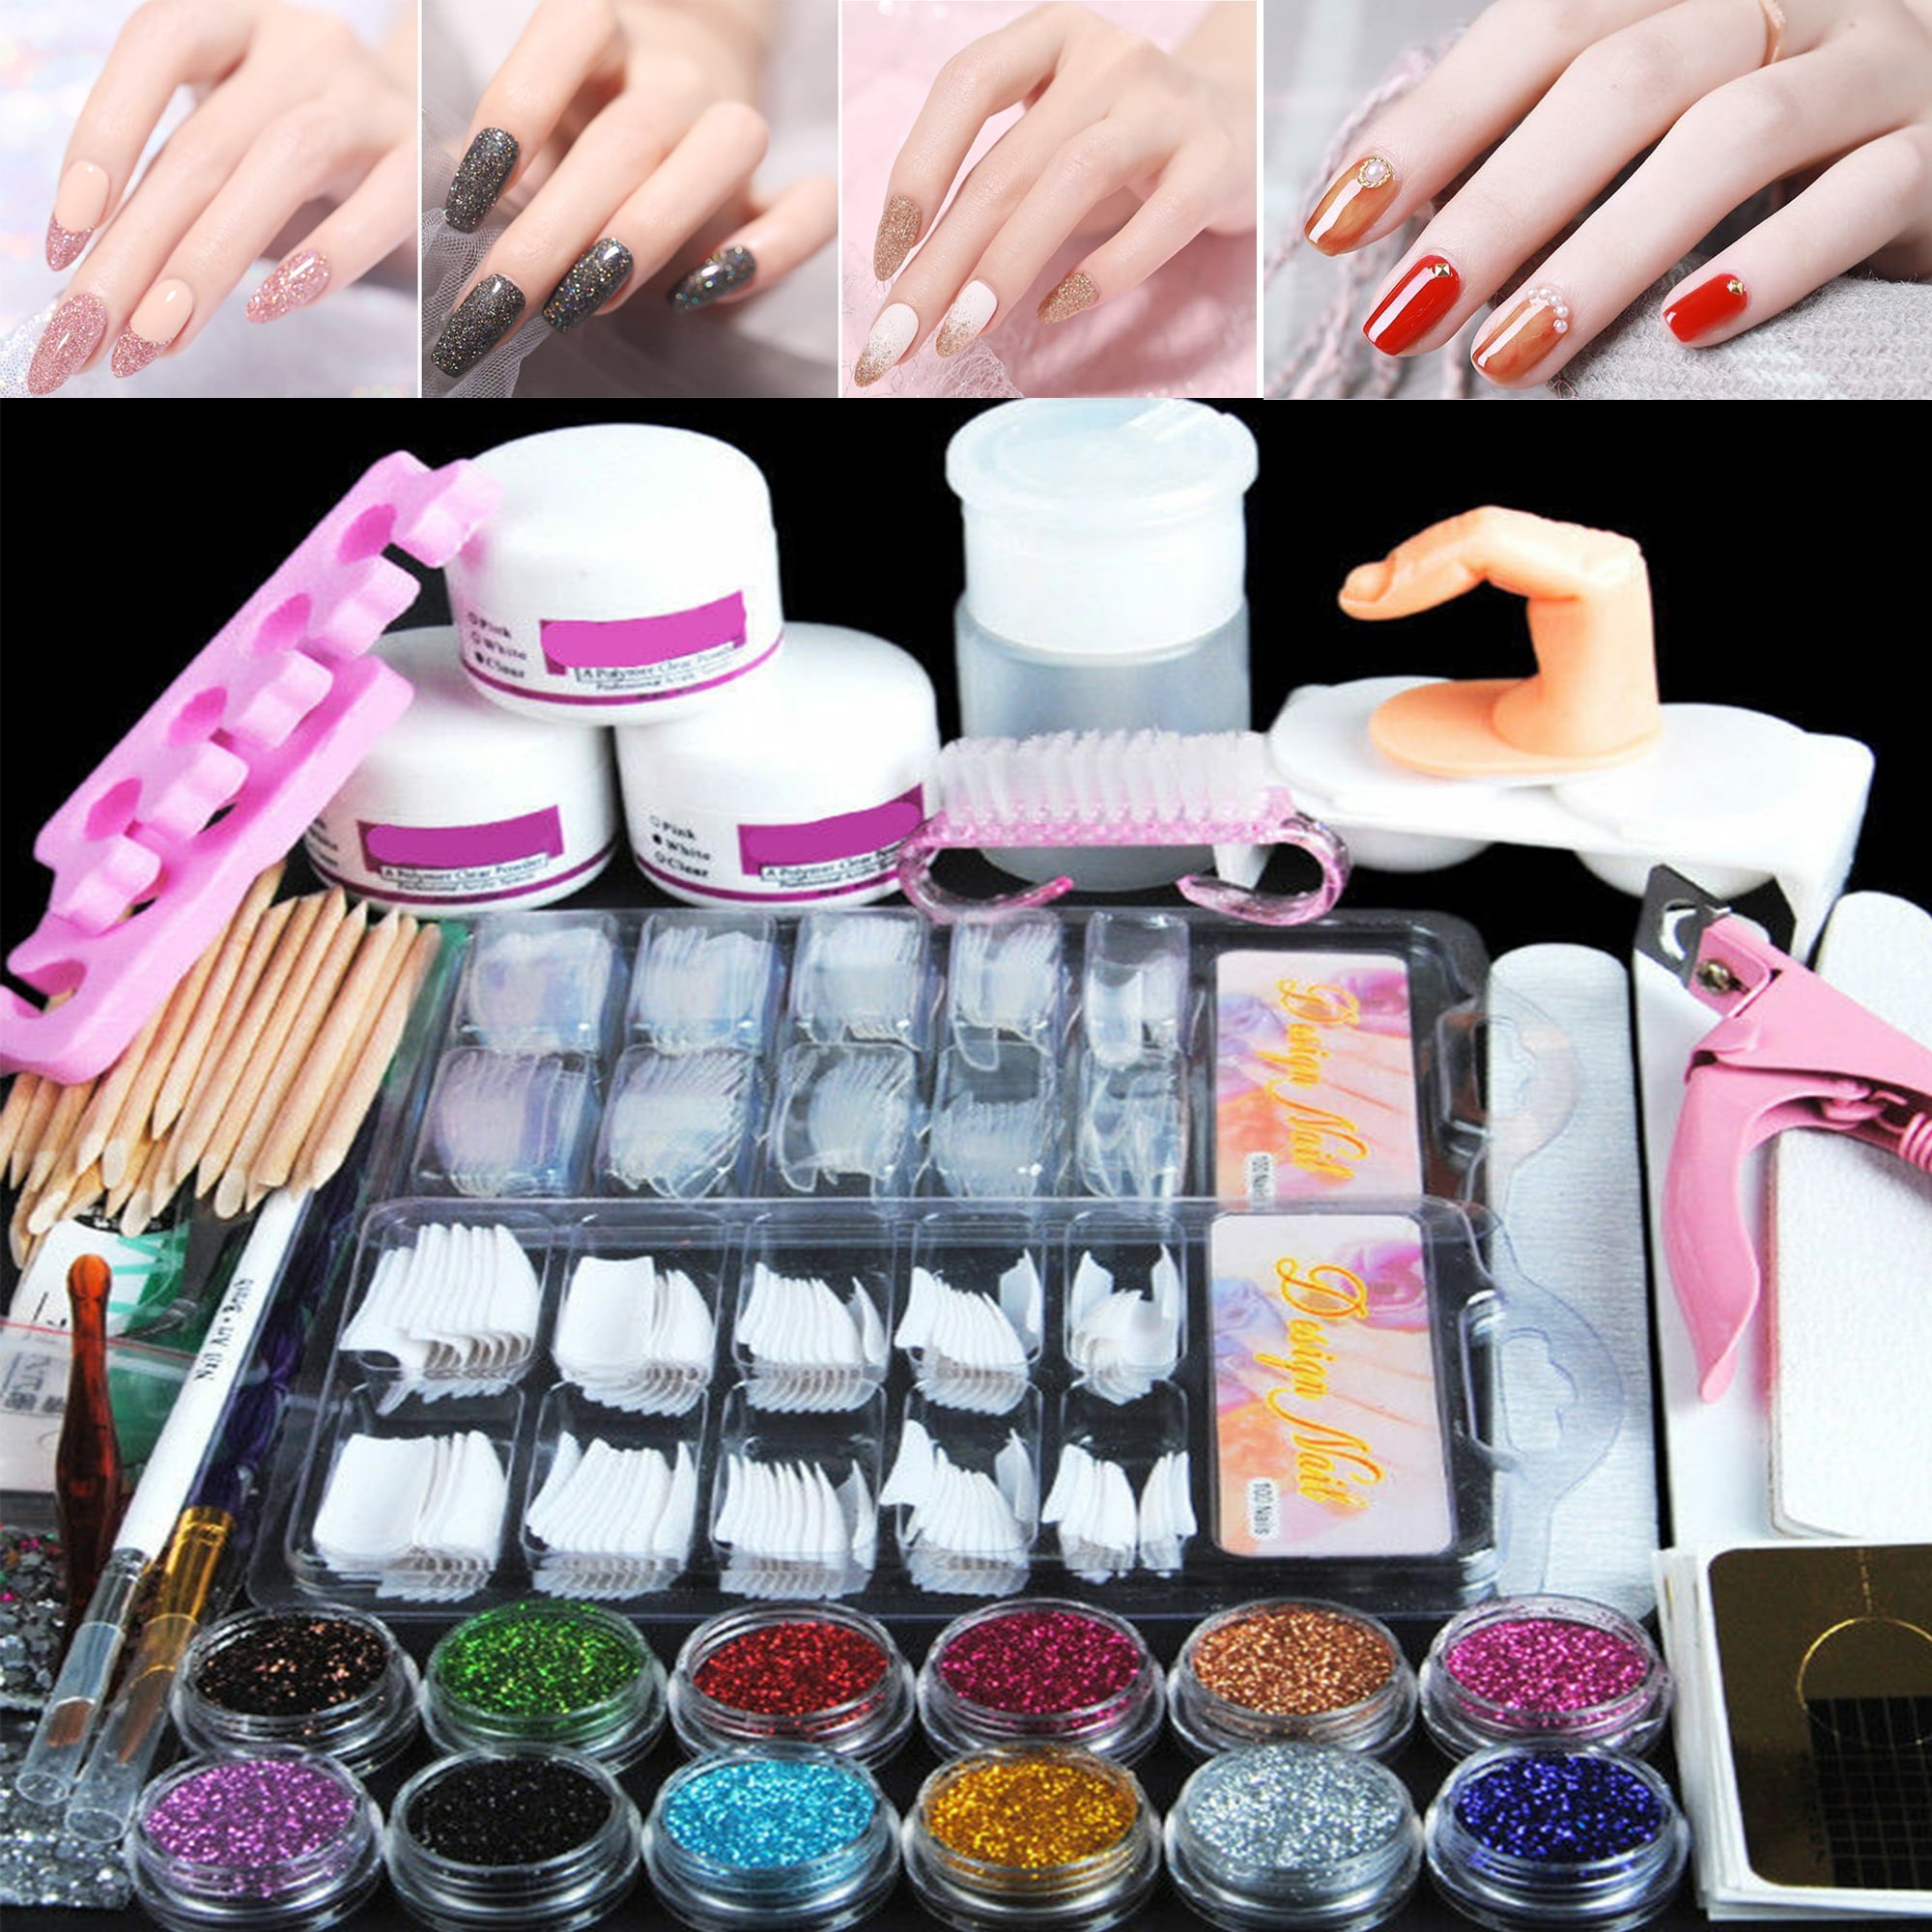 YaFex Electric Nail Drill Machine, Electric Nail File Manicure Pedicure Tool  Kit with Acrylic Nail Clipper, Portable Efile for Acrylic Gel Nails,  Shaping, Polishing, Filing, Filer - Walmart.com